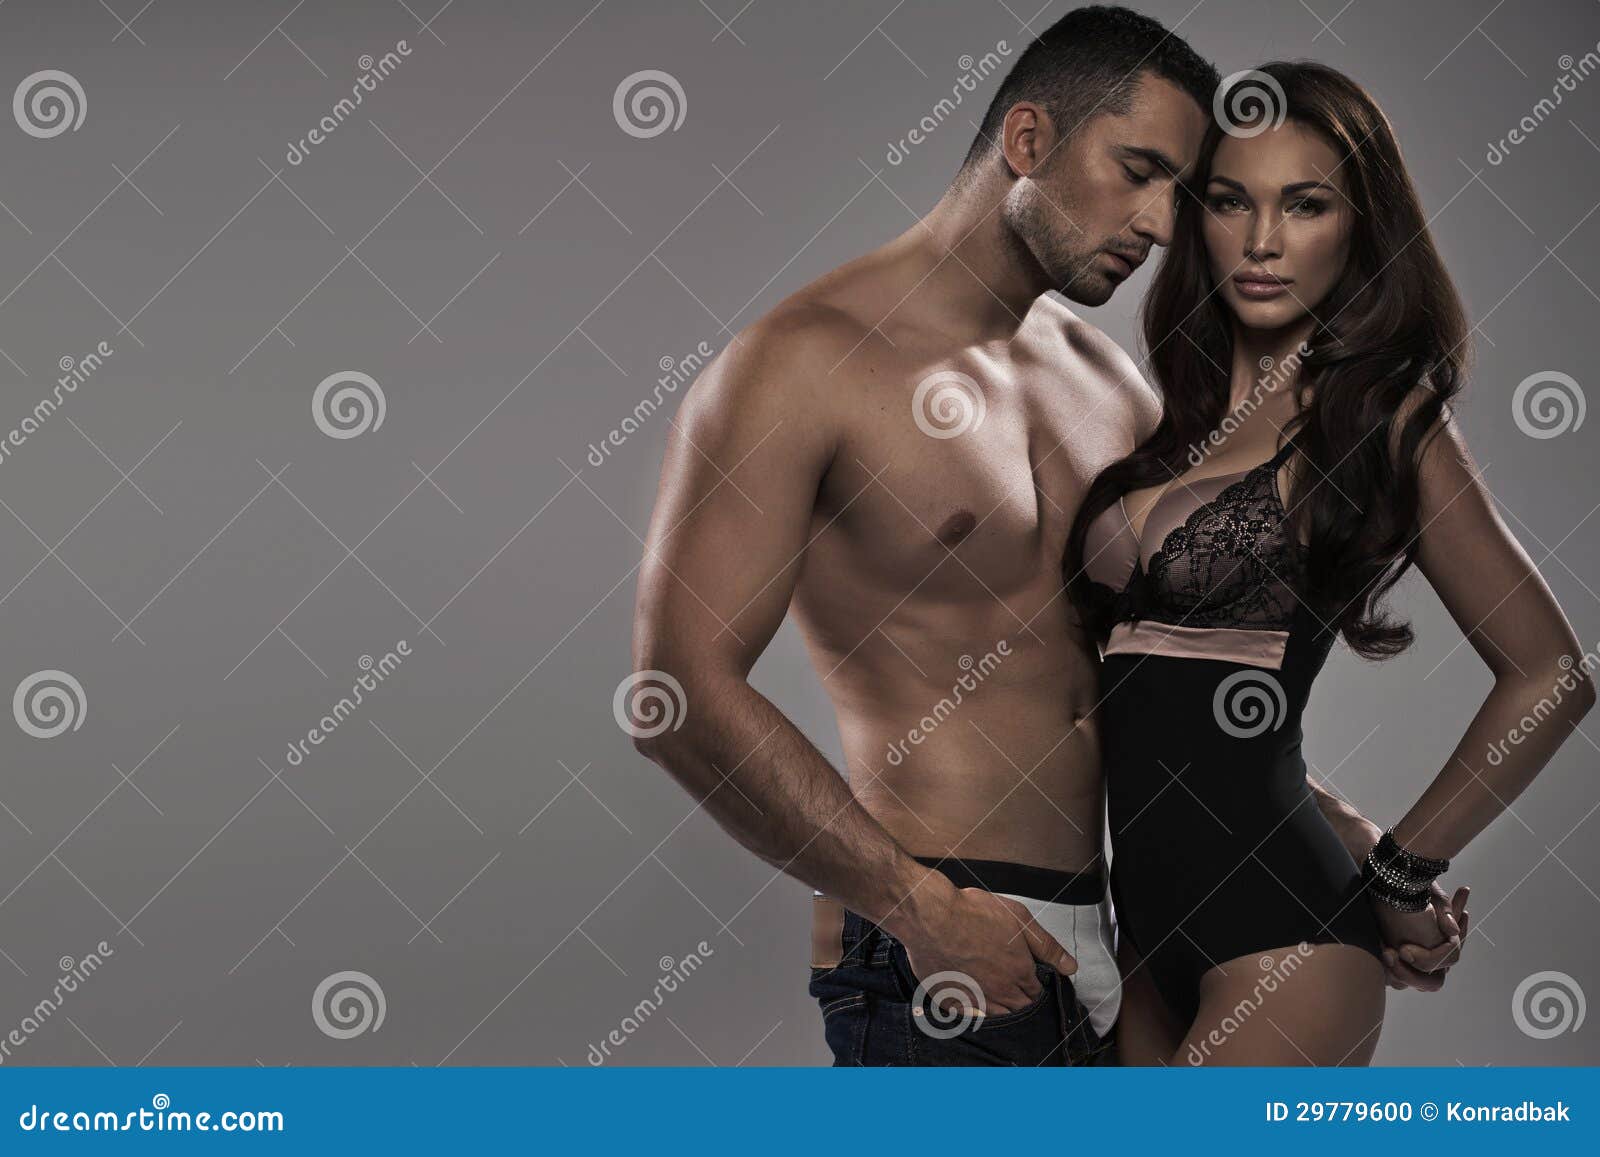 Muscular Man Touching His Alluring Wife Stock Photo photo